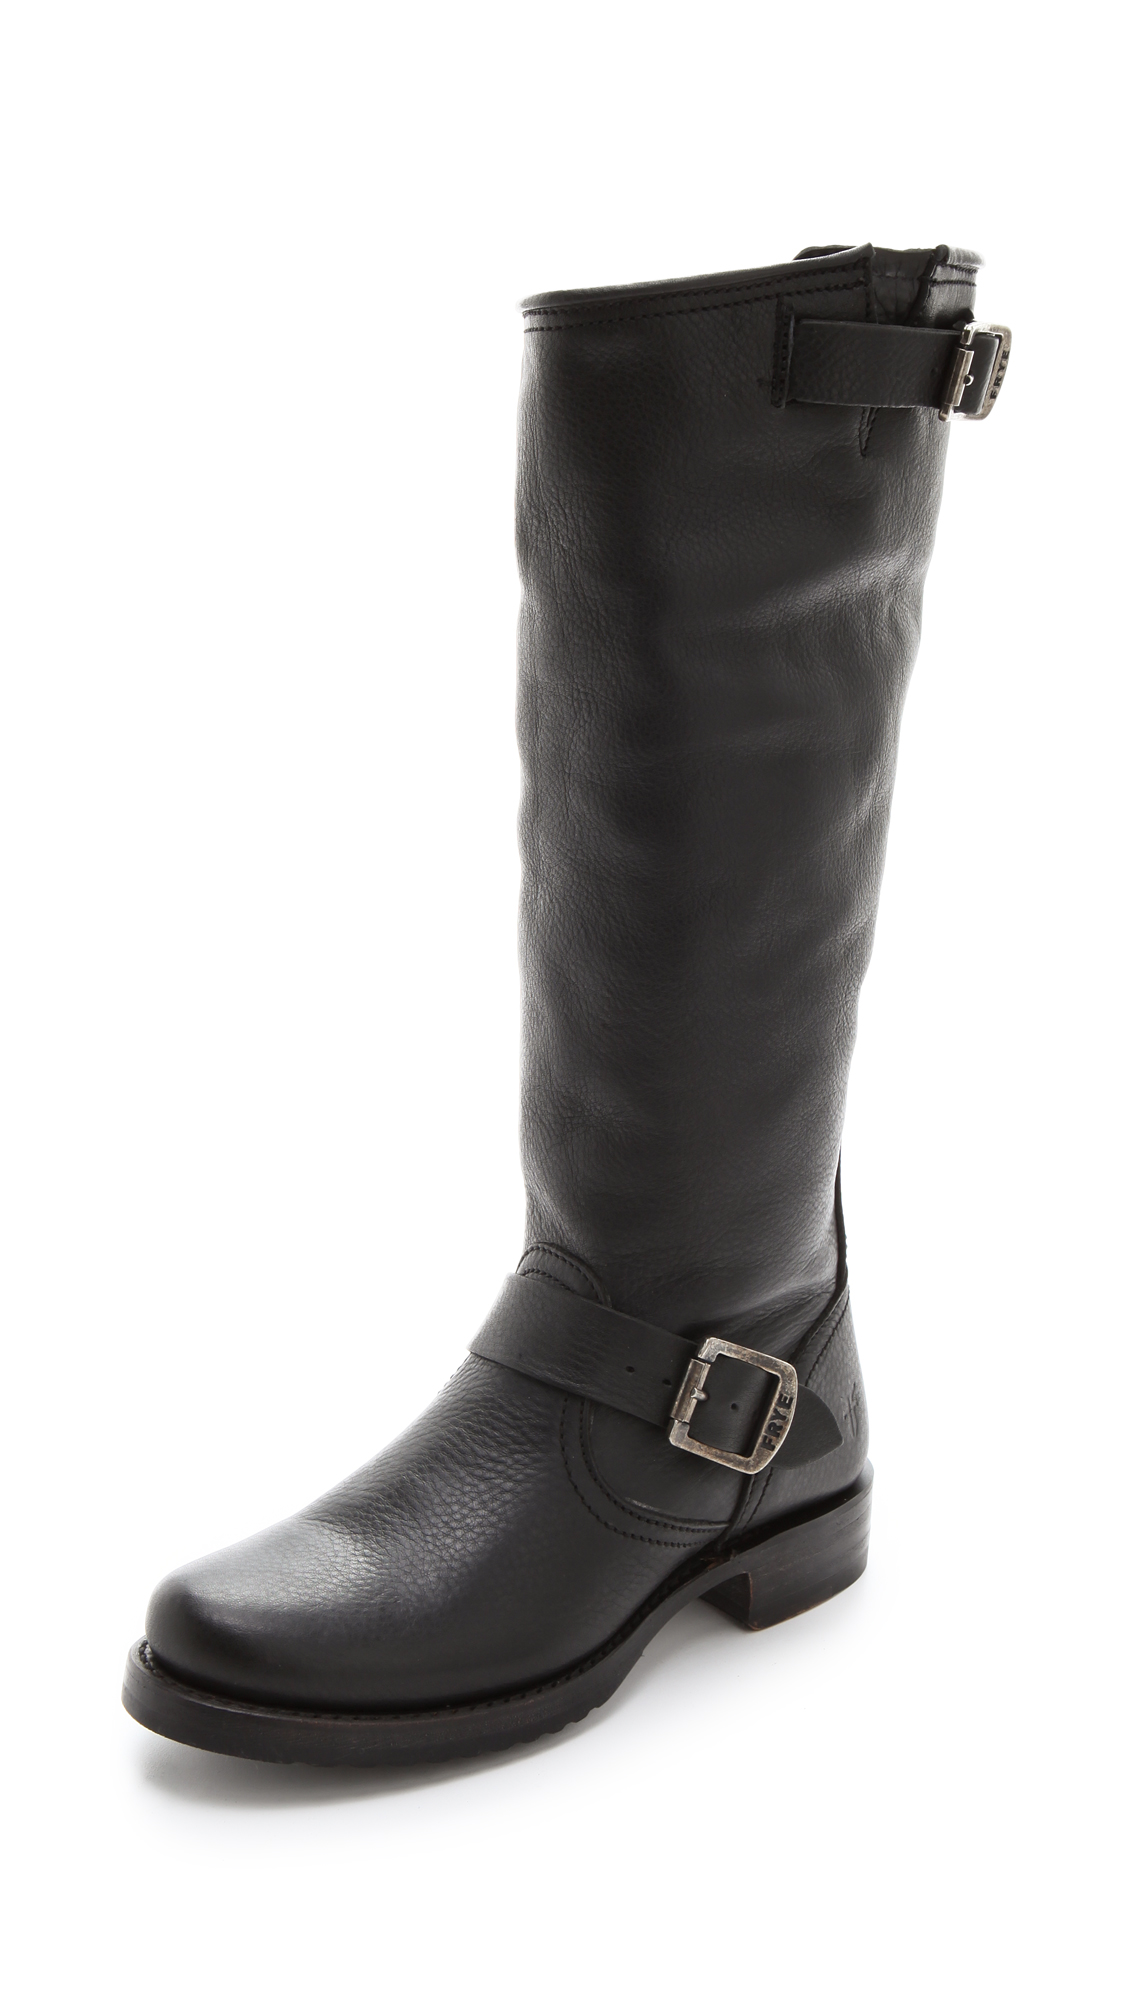 Lyst - Frye Veronica Slouch Boots in Black